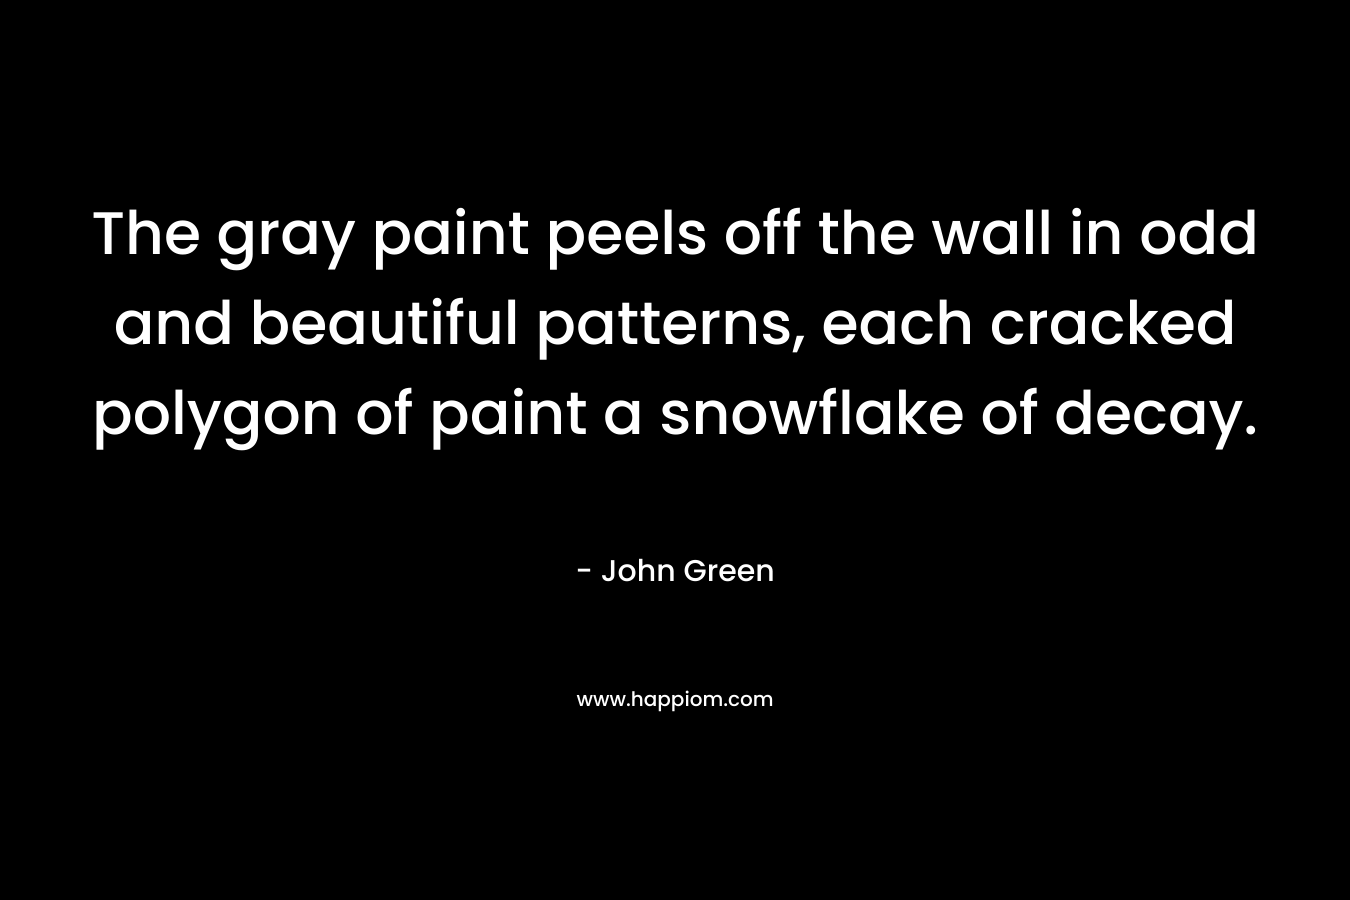 The gray paint peels off the wall in odd and beautiful patterns, each cracked polygon of paint a snowflake of decay.